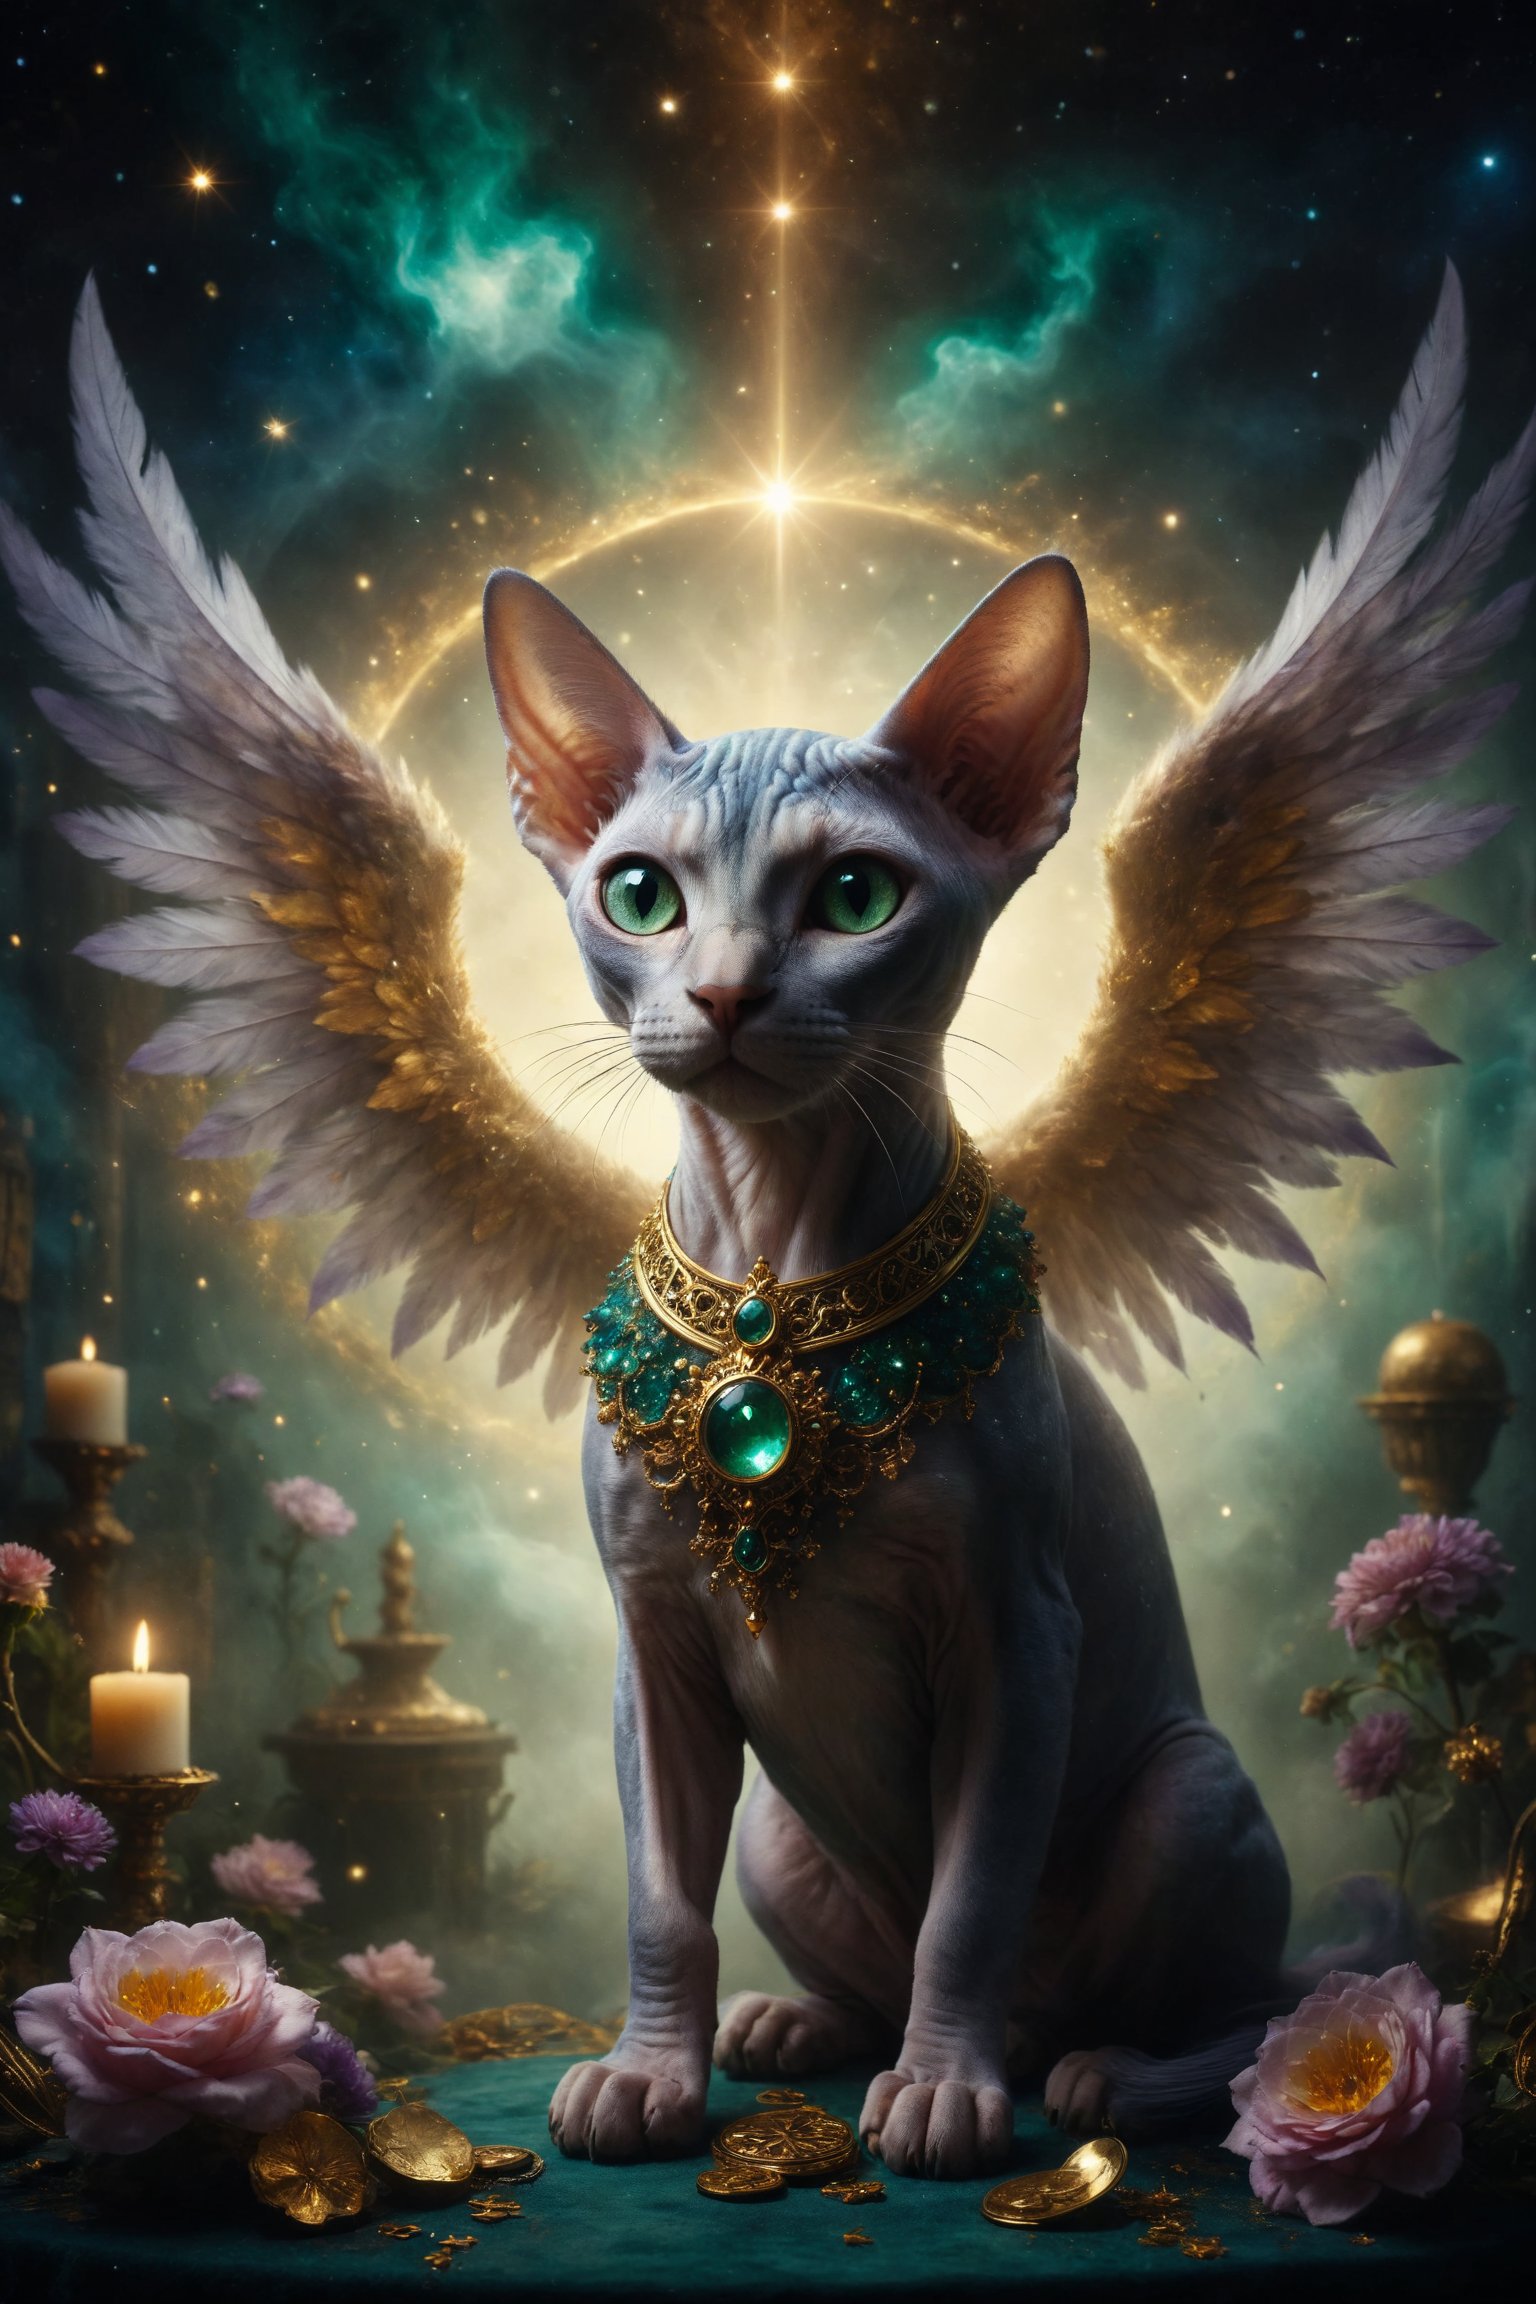 The central image should be a majestic Sphynx cat with wing majestic whit, a starry background and astrological symbols. The cat wears a golden crown and is surrounded by a halo of golden light. mistic smoke aura, At the bottom, he added subtle, ornate floral details in gold and emerald tones. with magic particles, and smoke, fabric luxury, Use deep, rich colors such as dark blue, deep purple and gold to give a sense of mystery and spirituality. The design should evoke a sense of luxury and magic, inviting the user to explore the world of tarot with reverence and wonder.